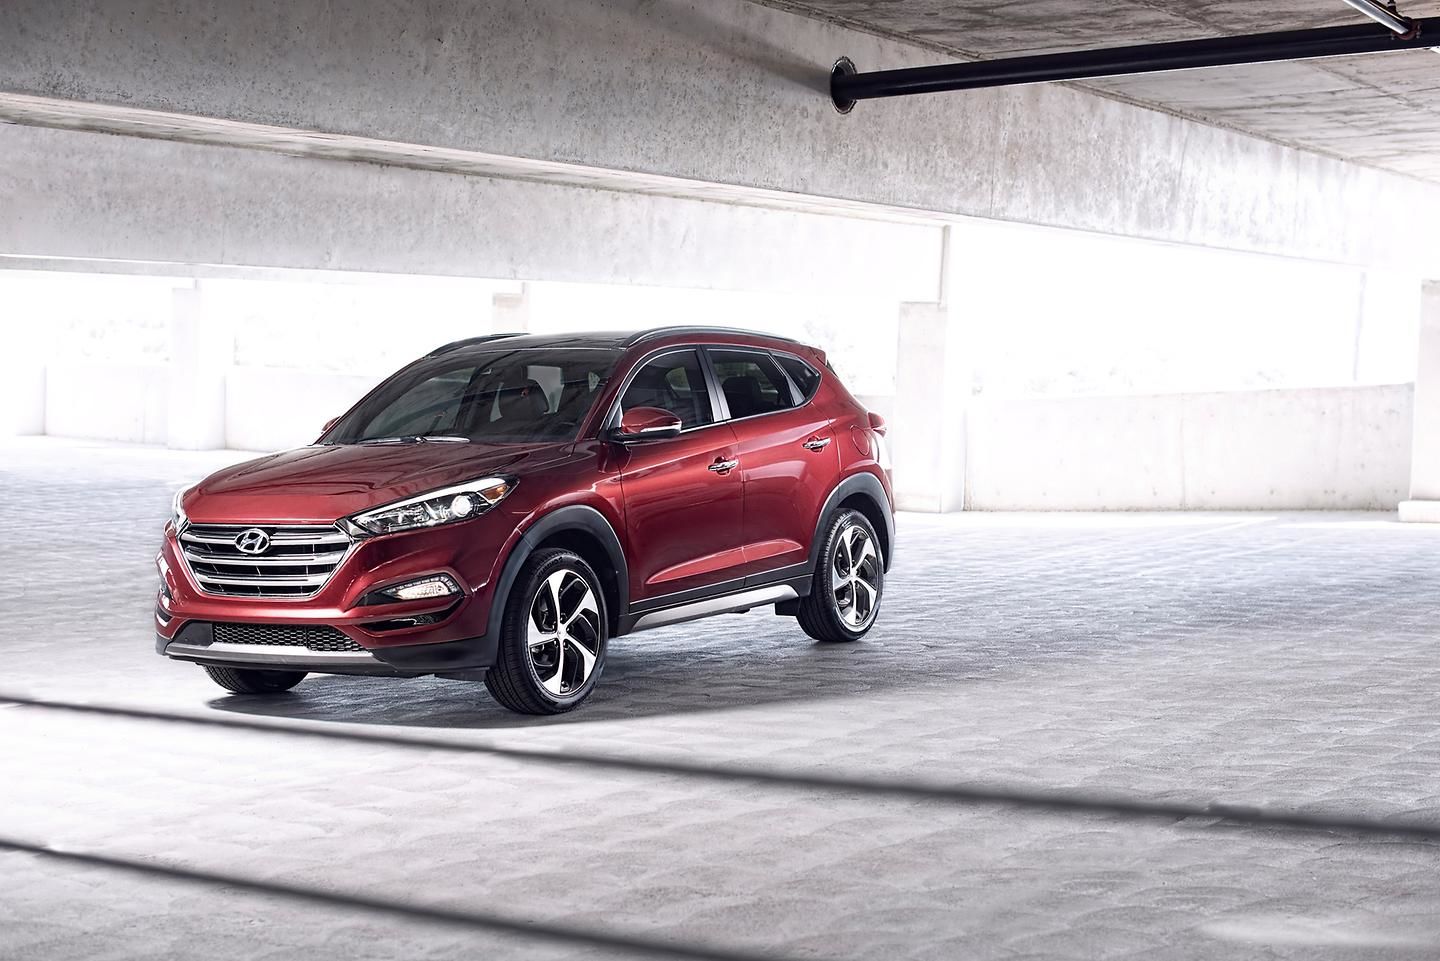 All-new Tucson Named AAA Top Vehicle Picks for 2016 in the U.S.